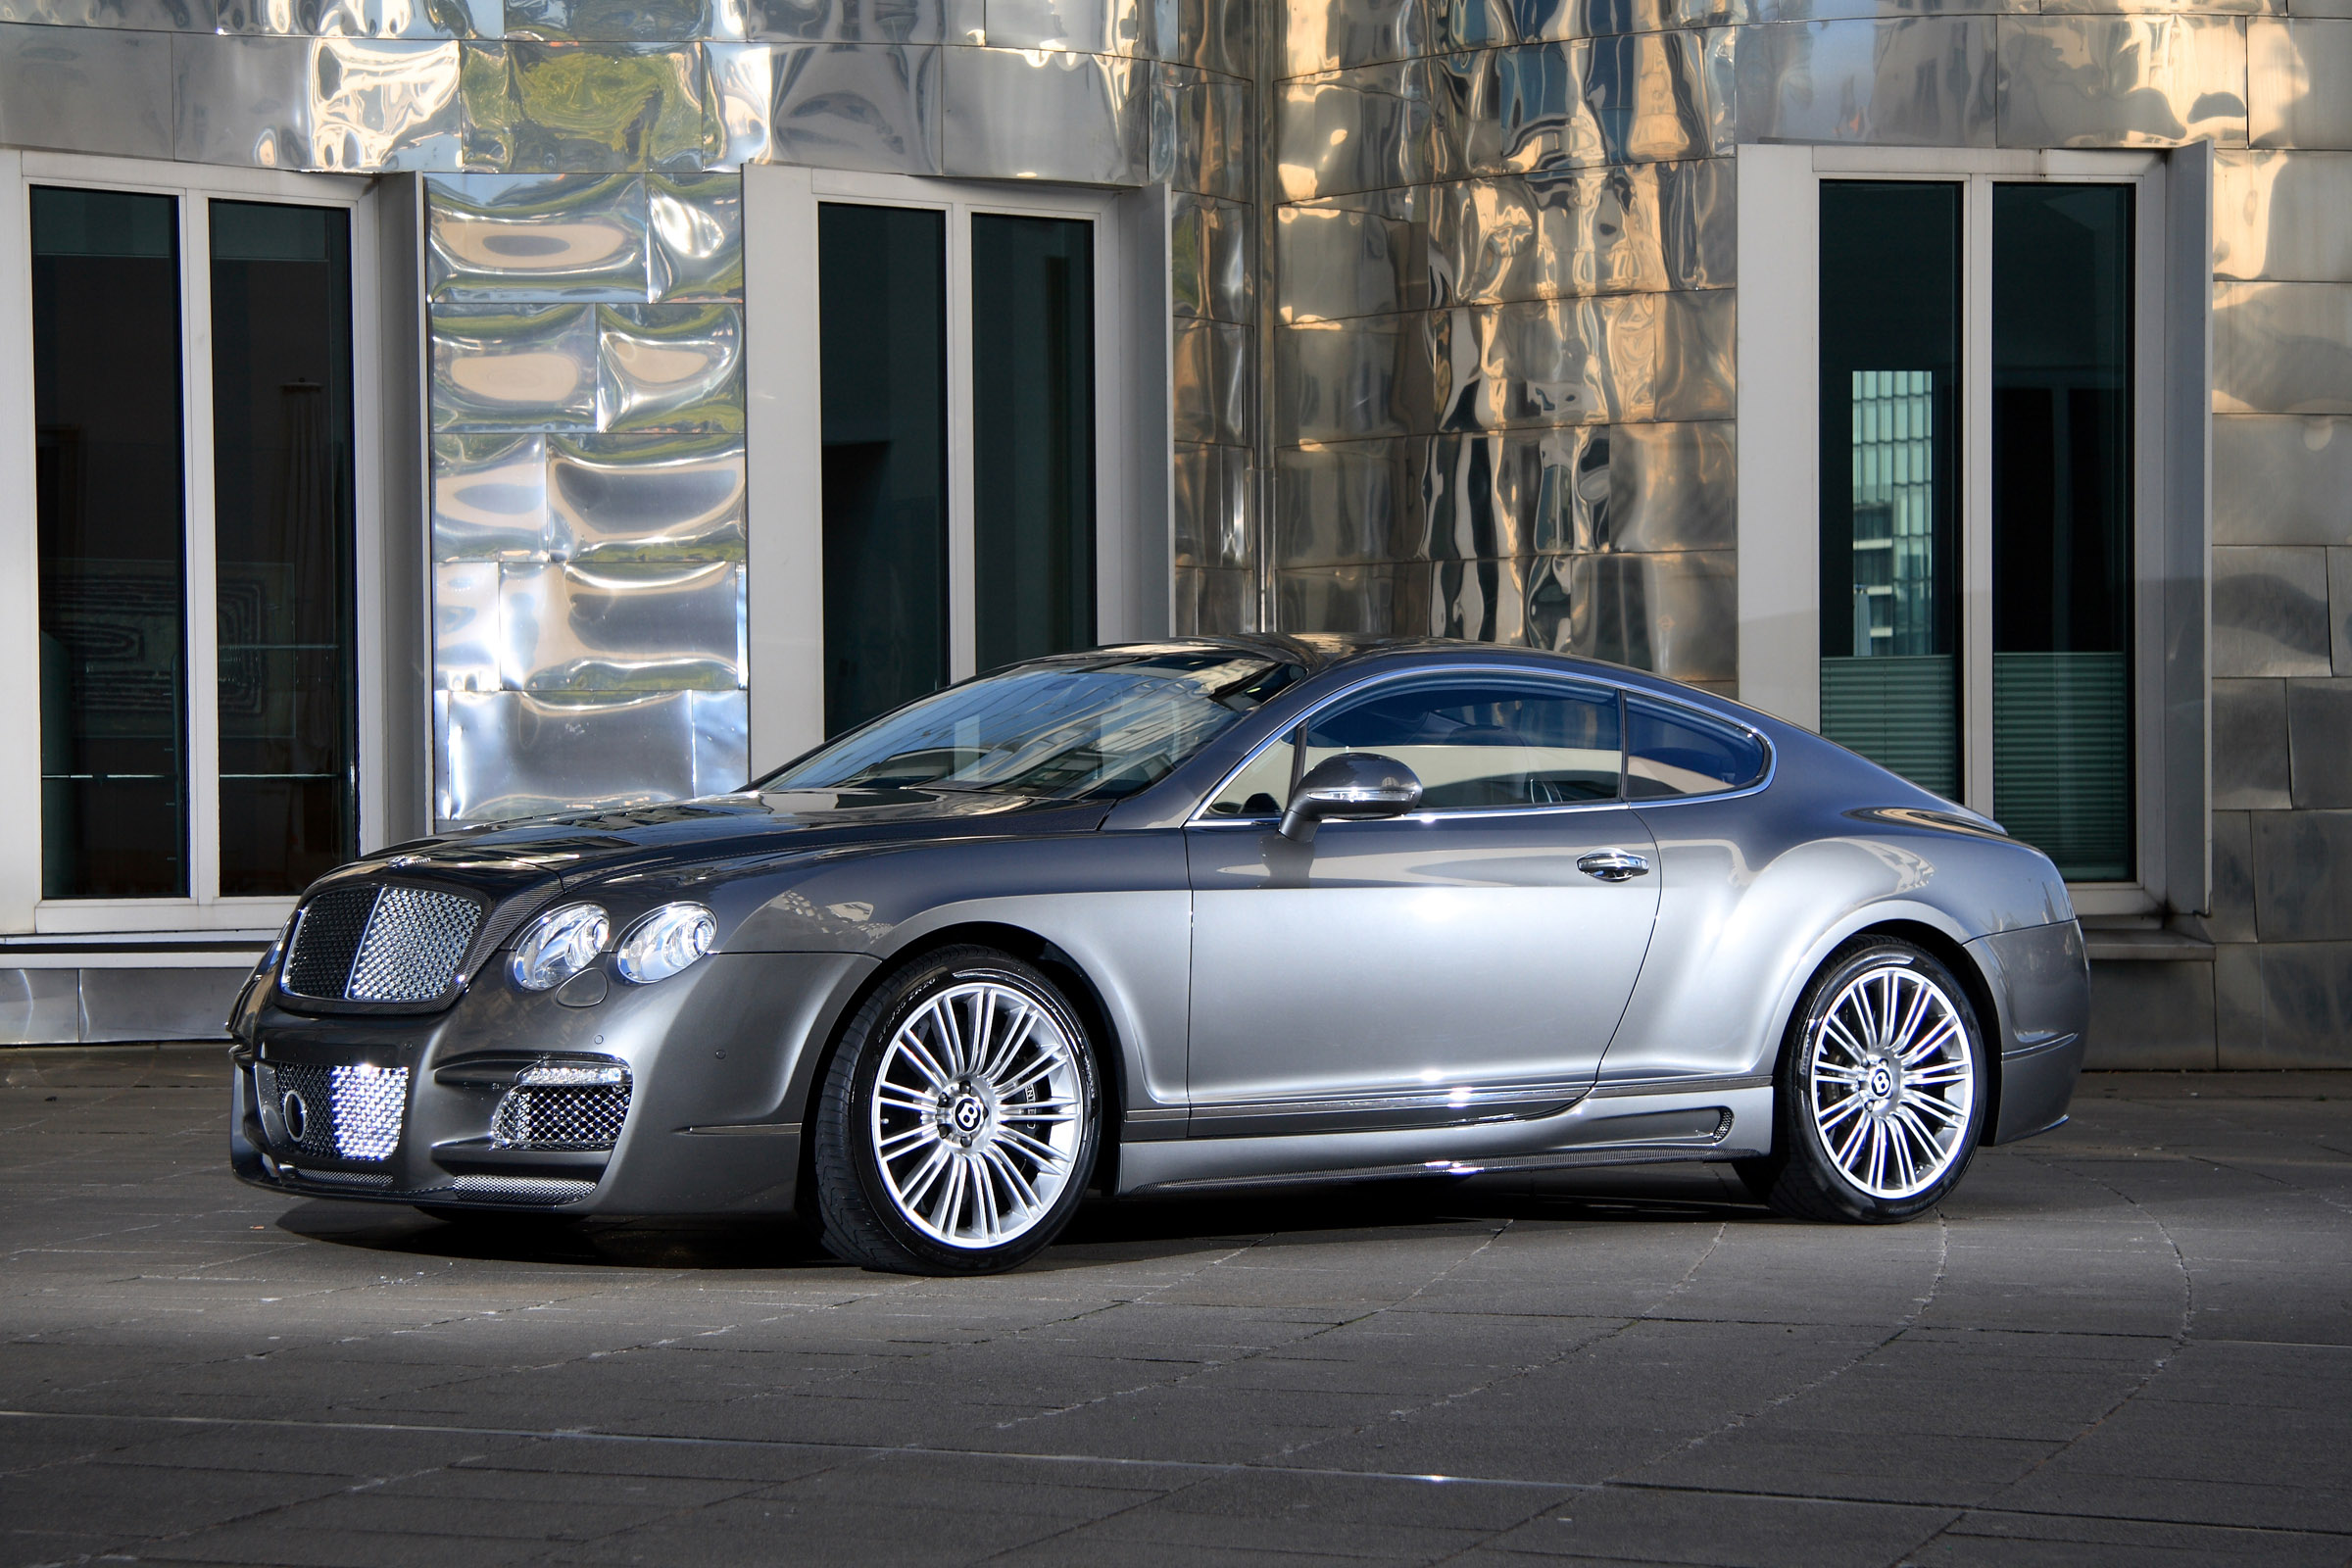 2010, Anderson germany, Bentley, G t, Speed, Elegance, Luxury, Coupe, Tuning Wallpaper